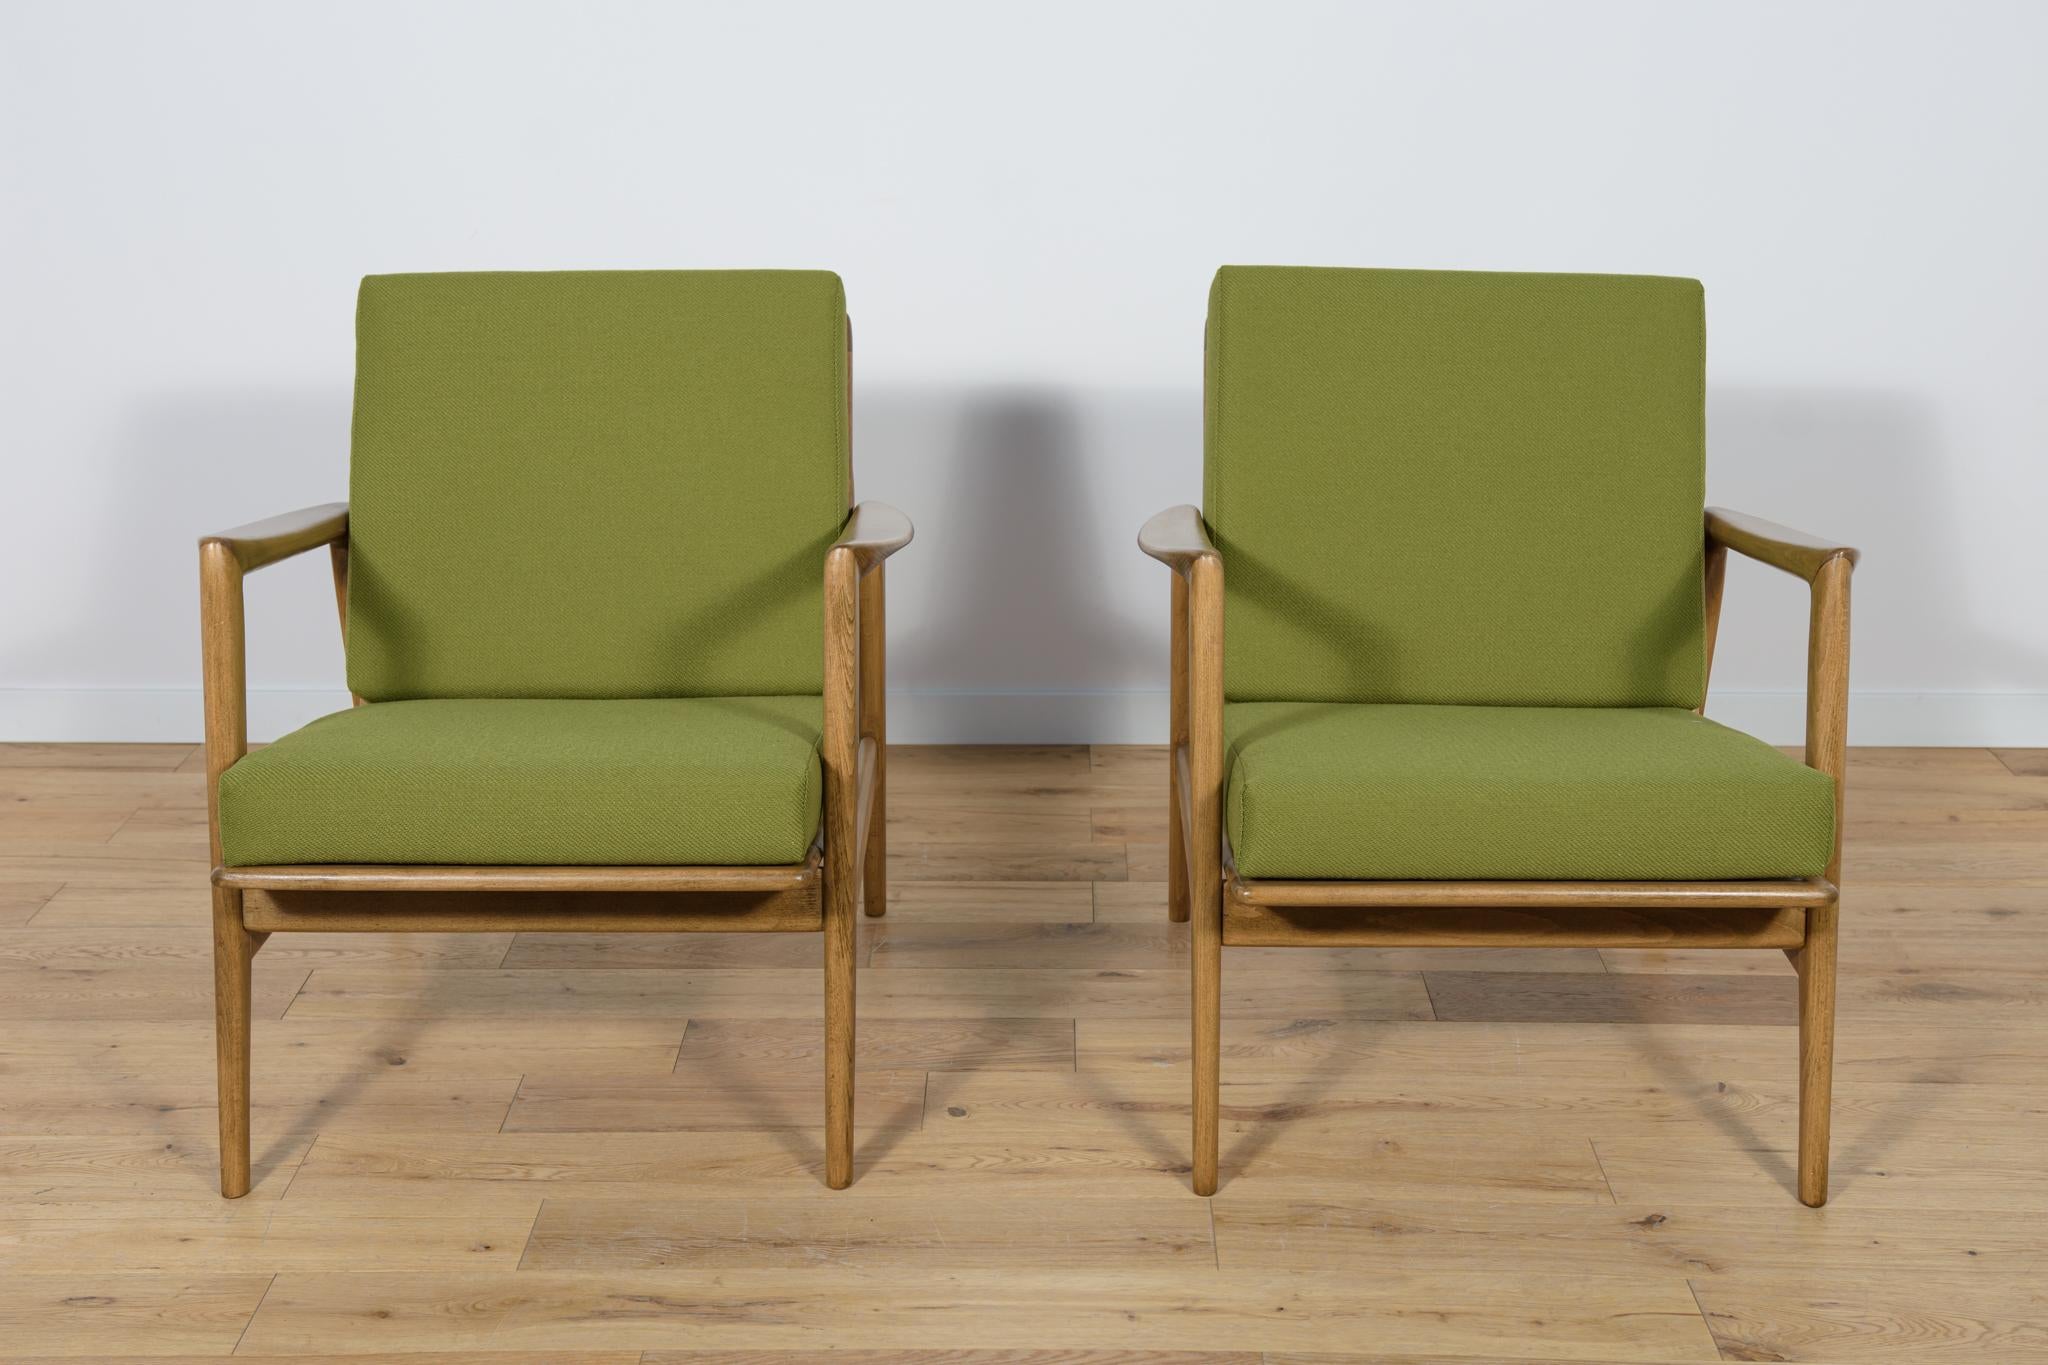 This pair of armchairs was produced by the Polish company Swarzędzka Furniture Factory in 60s.The armchairs have new cushions, reupholstered in a quality green fabric. The beech framehas been cleaned, painted with a walnut colored stain, and